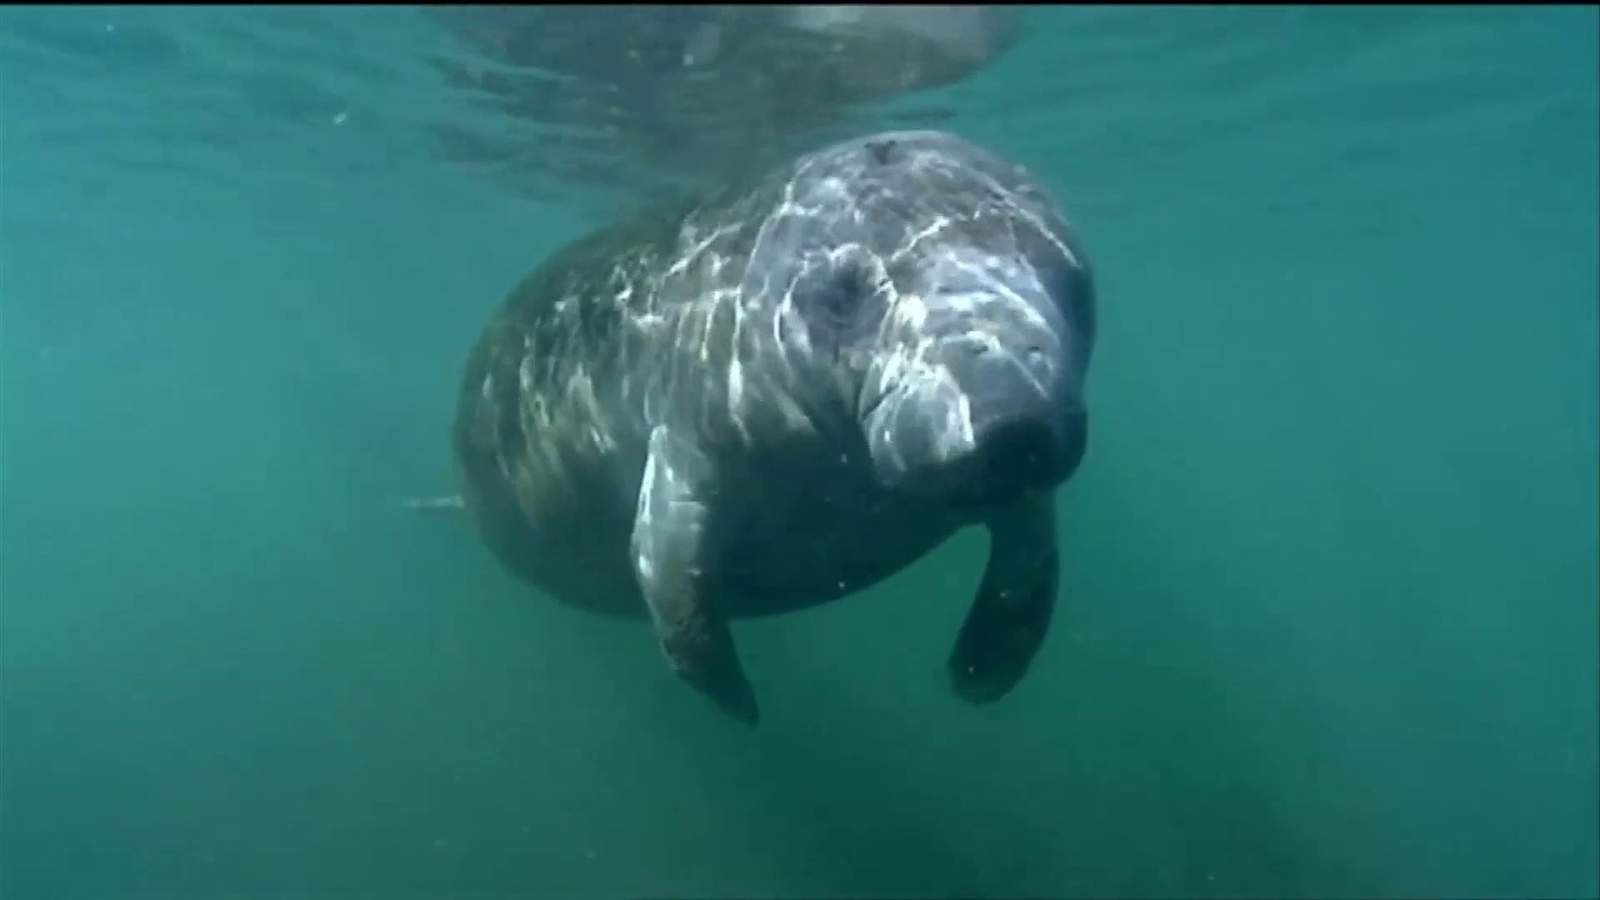 Wildlife officials predict healthy number of manatees this summer